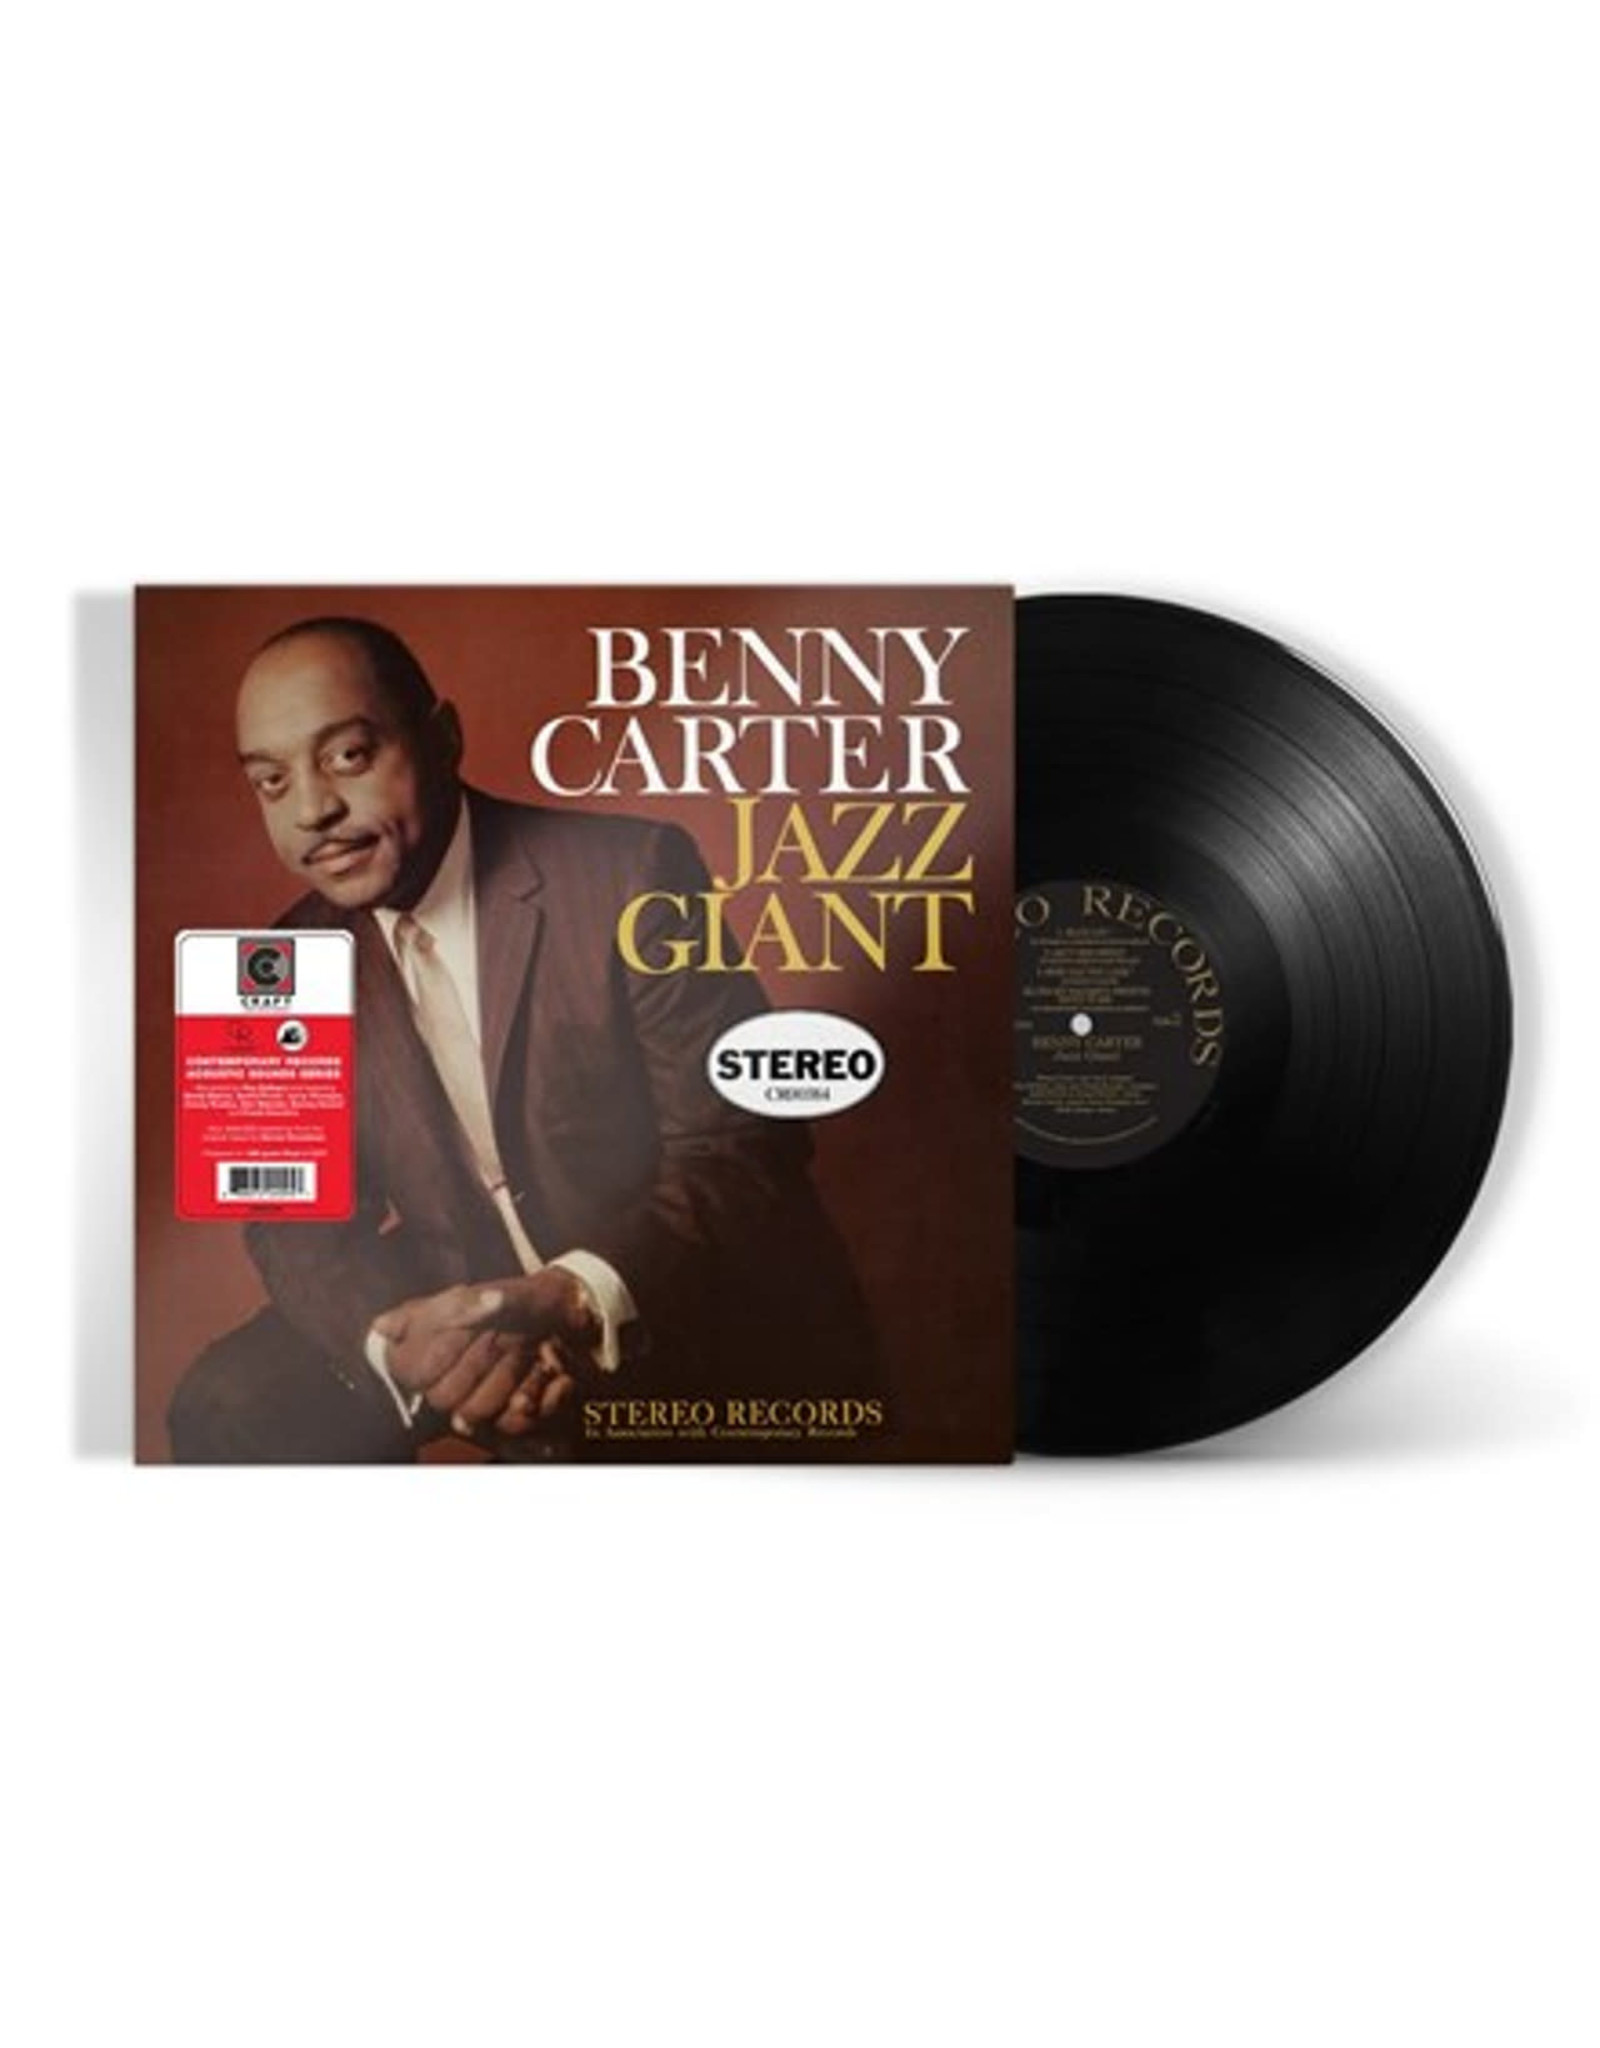 Craft Carter, Benny: Jazz Giant (Contemporary Records Acoustic Sounds) LP